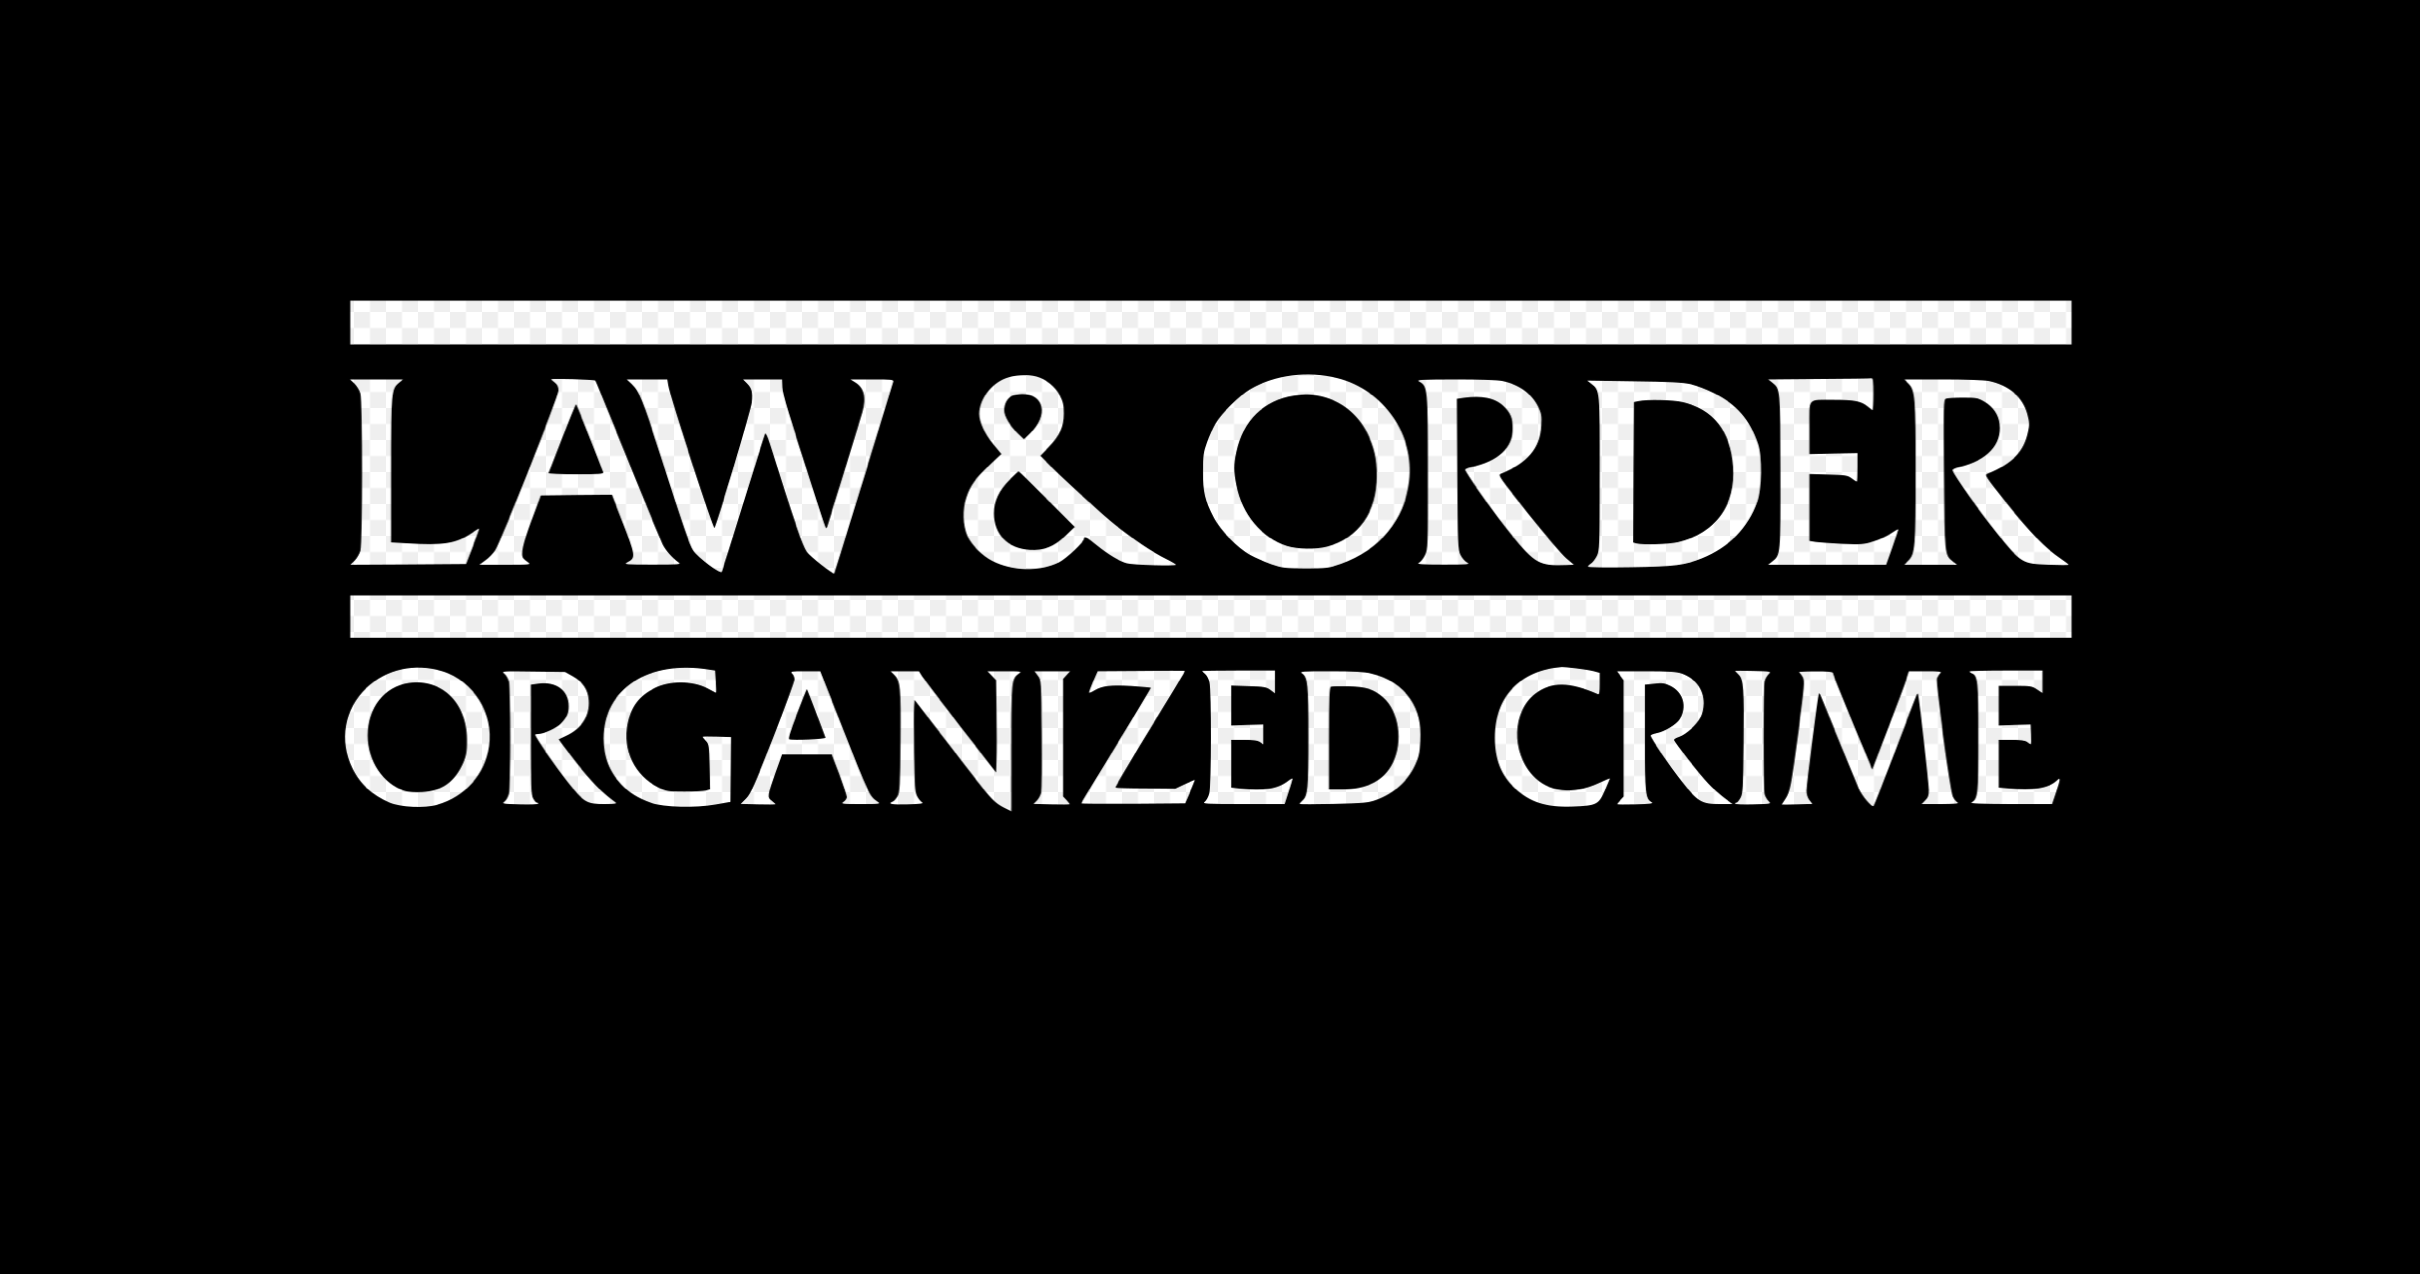 Law & Order: Organized Crime: First two episodes show criminals using machine guns